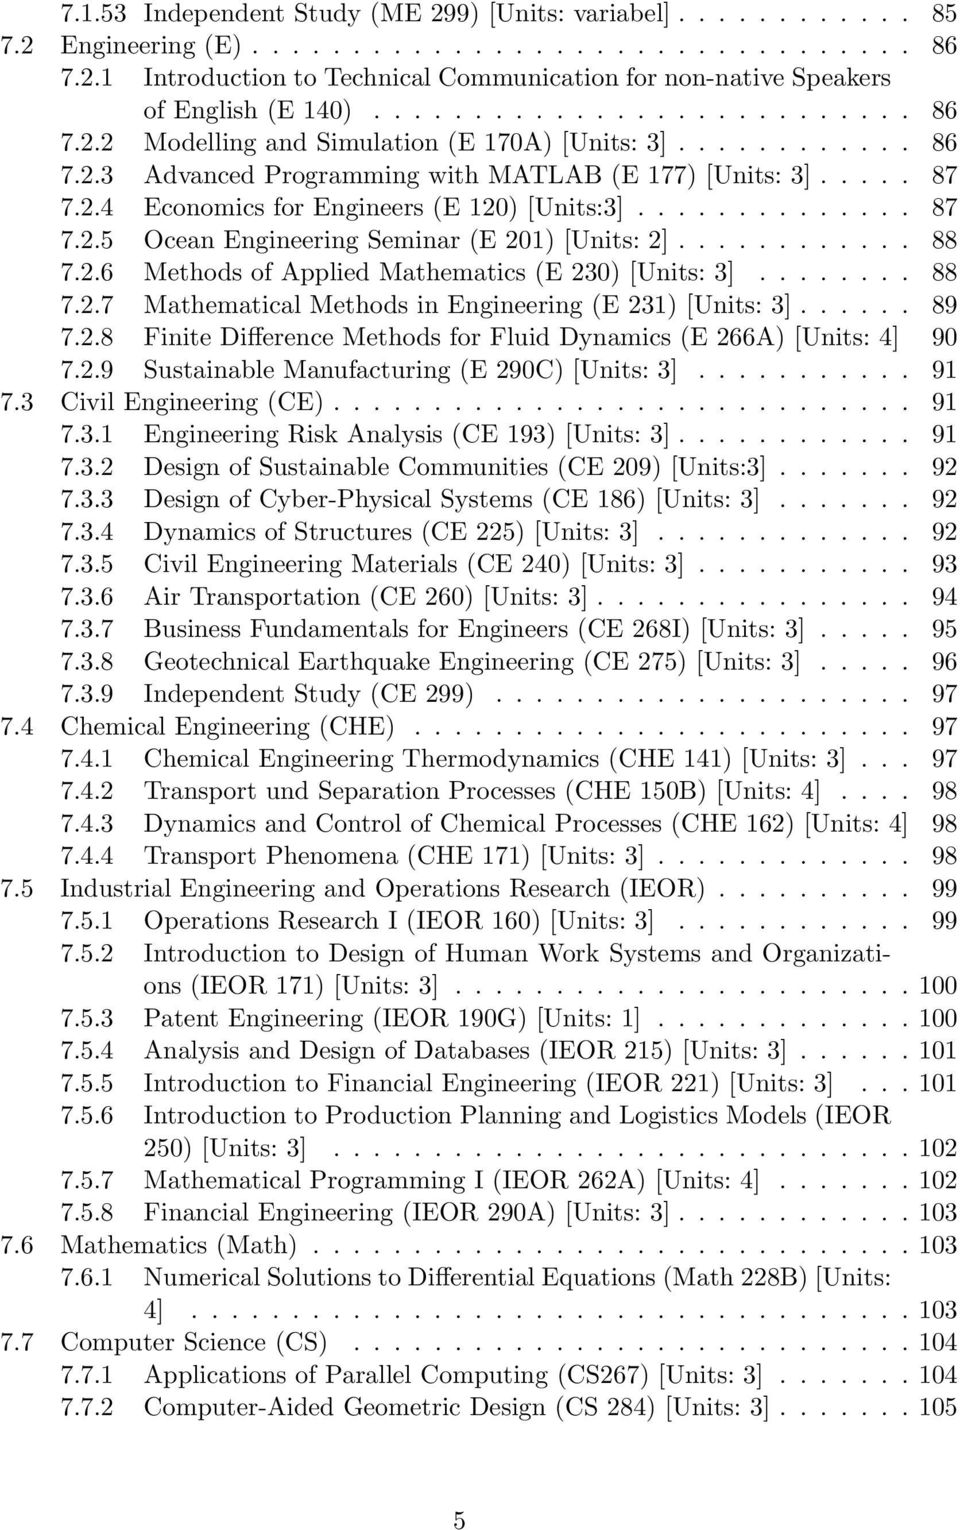 ............. 87 7.2.5 Ocean Engineering Seminar (E 201) [Units: 2]............ 88 7.2.6 Methods of Applied Mathematics (E 230) [Units: 3]........ 88 7.2.7 Mathematical Methods in Engineering (E 231) [Units: 3].